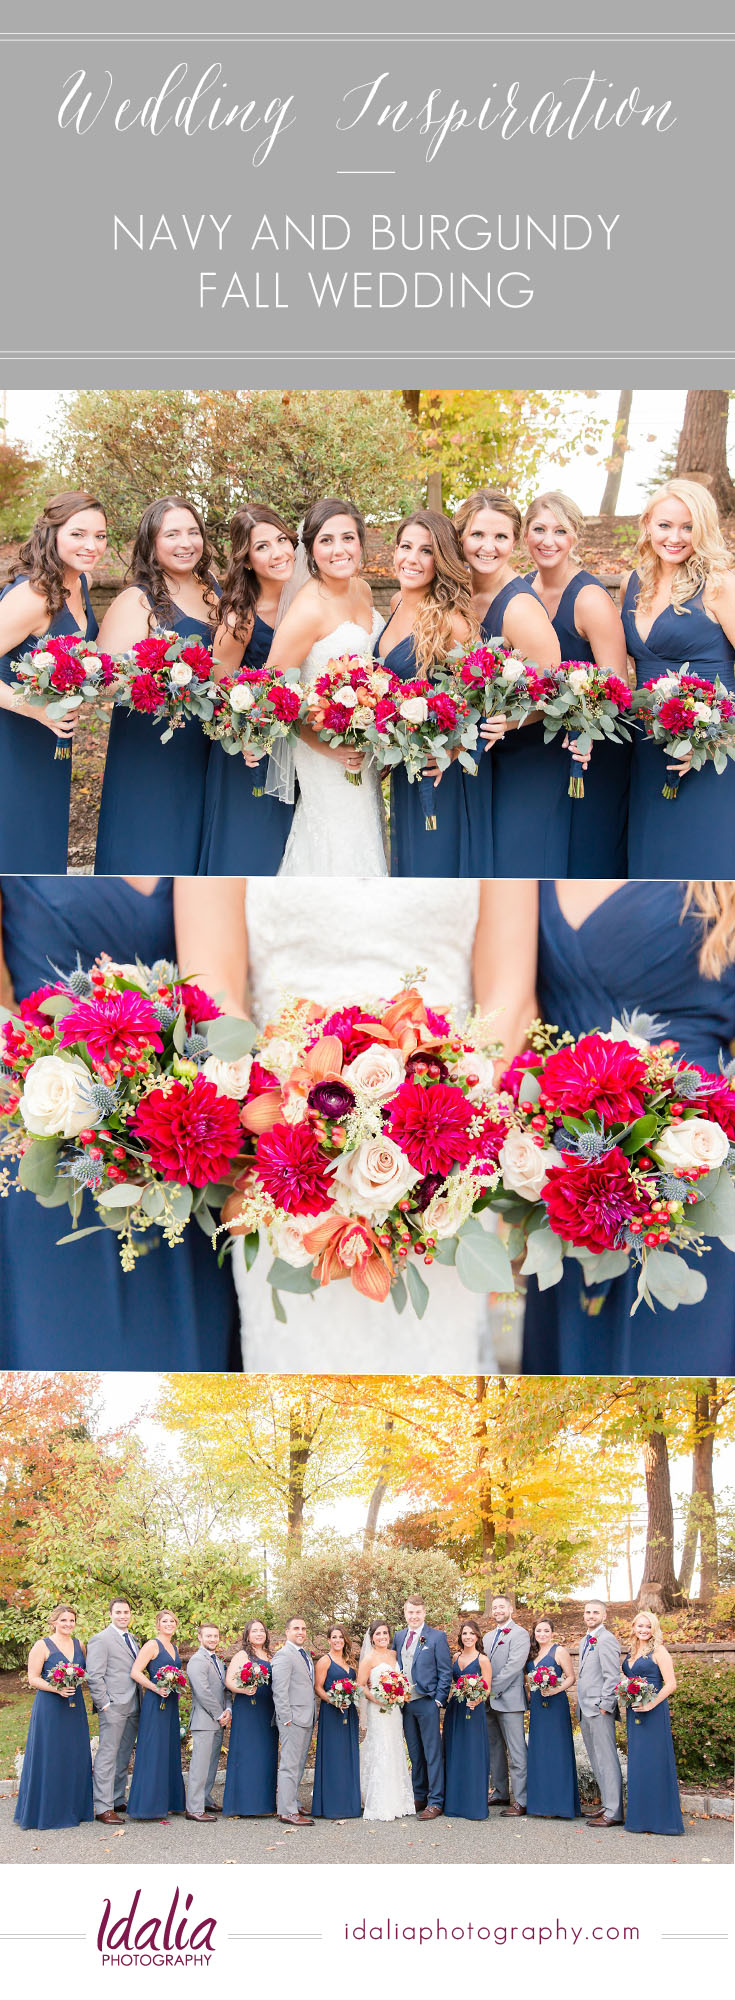 Bridal party in navy and burgundy | Fall Wedding Inspiration | Meadow Wood Manor | Randolph, NJ